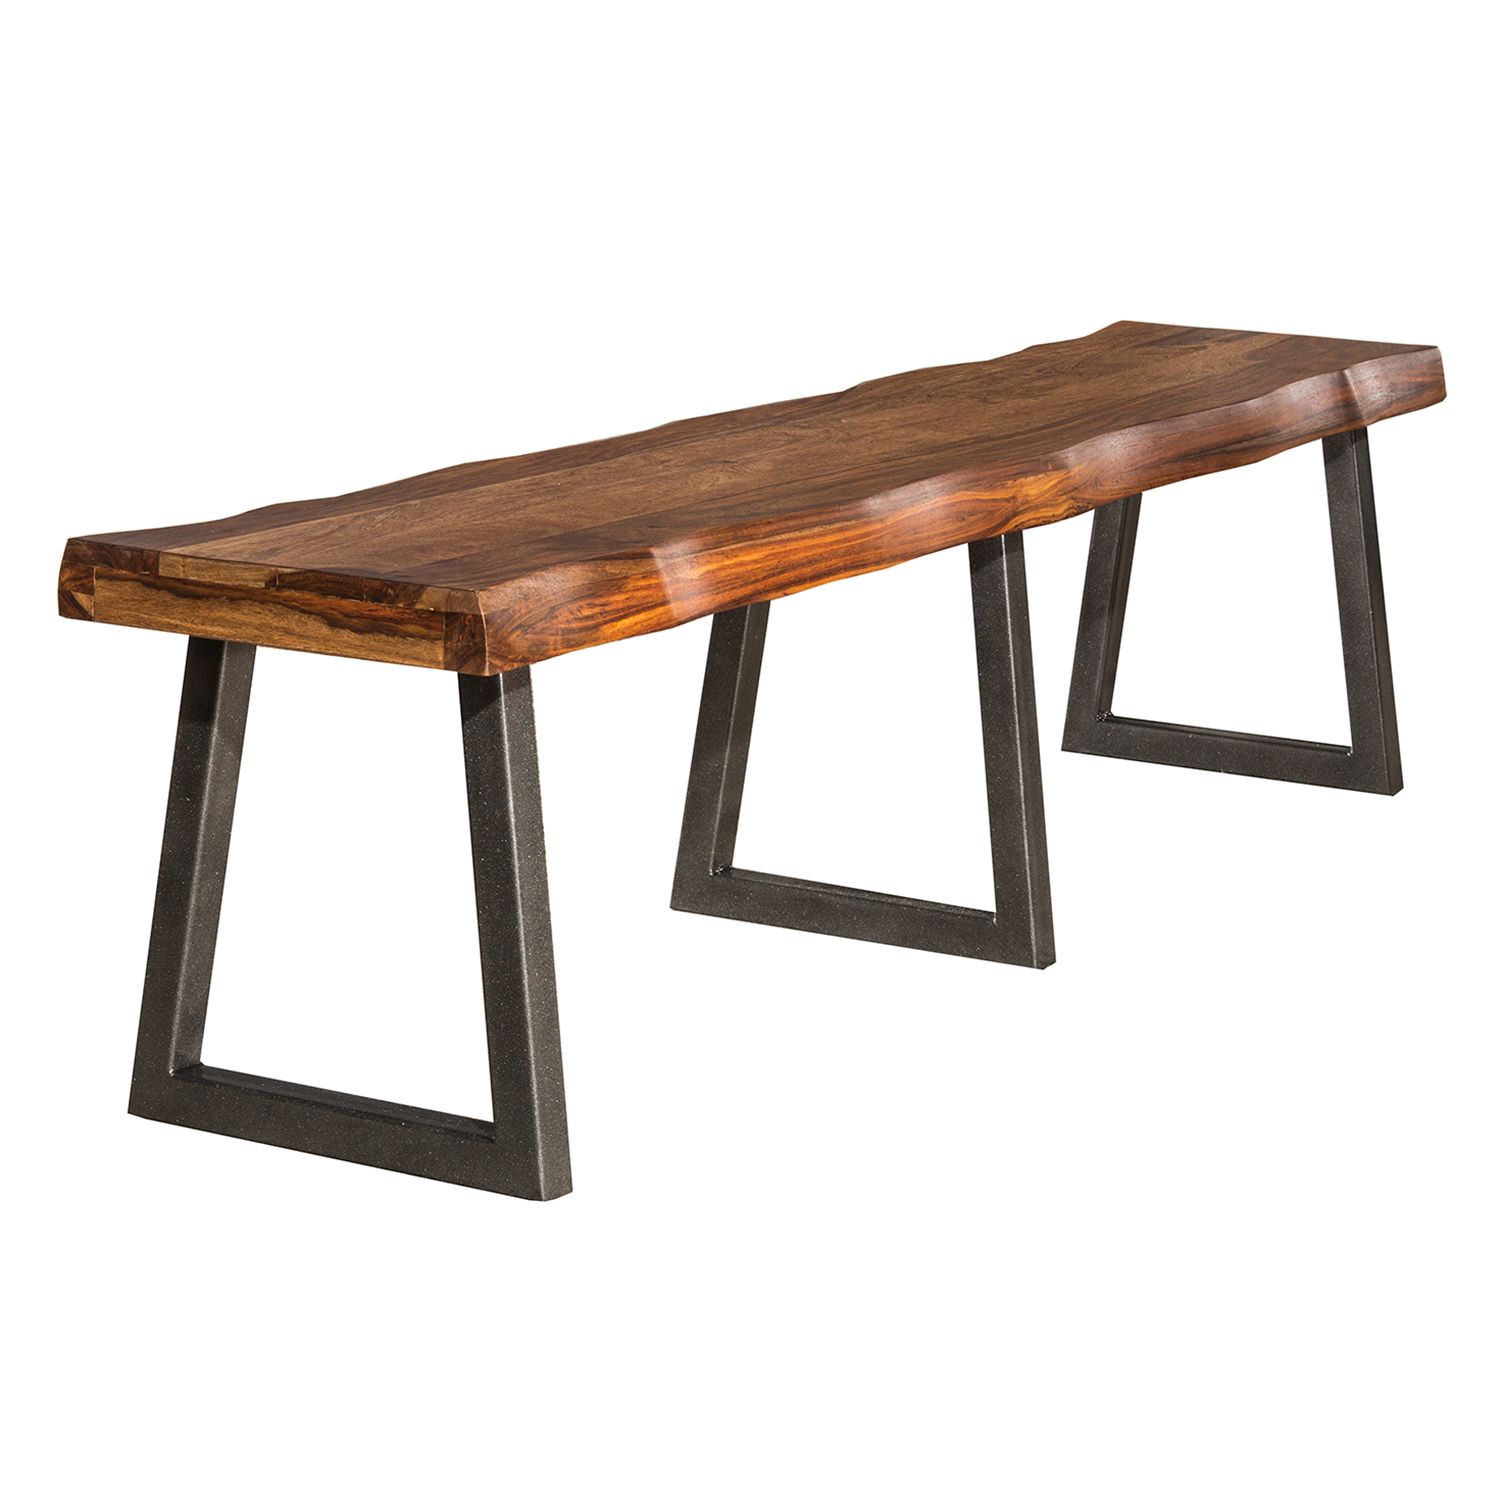 Image for Hillsdale Furniture Emerson Wood & Metal Bench at Kohl's.